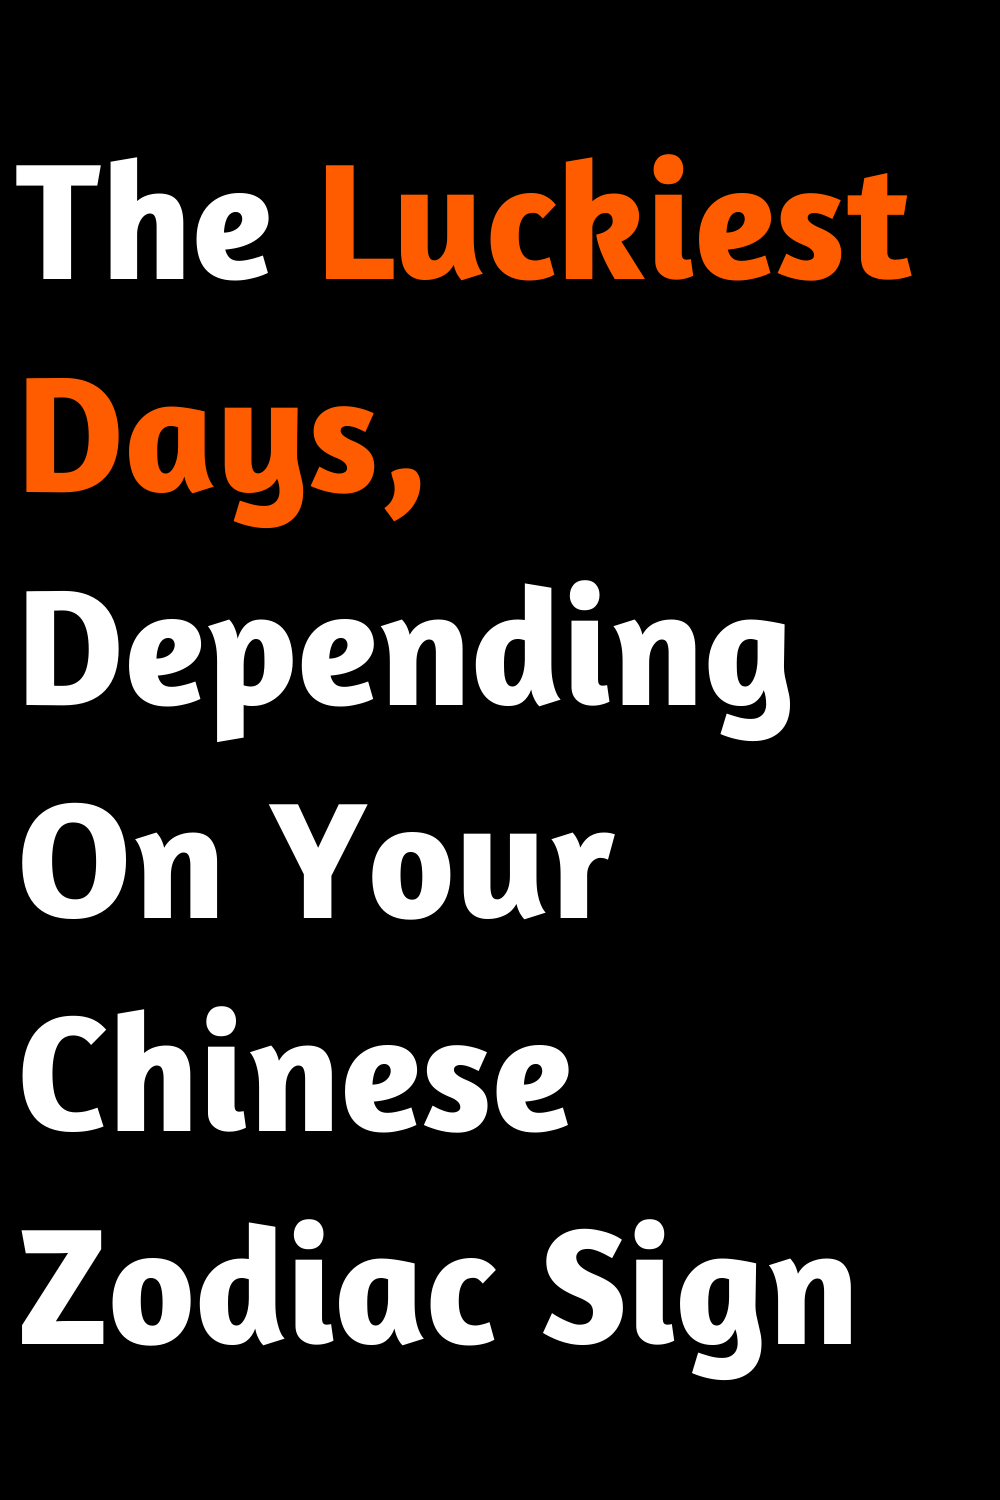 The Luckiest Days, Depending On Your Chinese Zodiac Sign